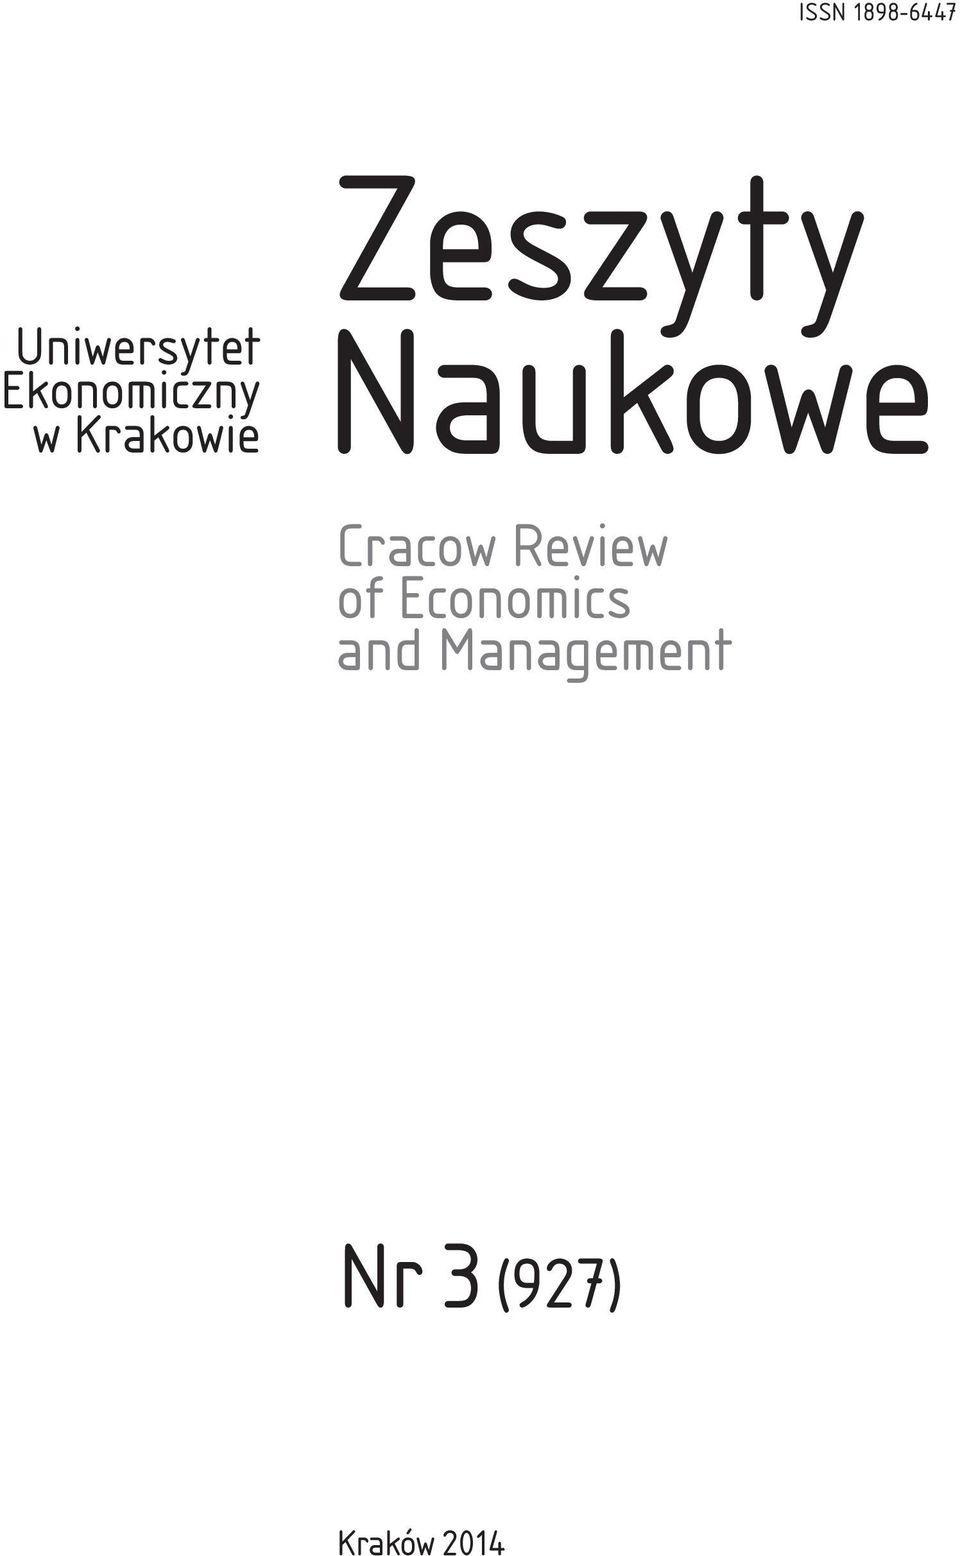 Naukowe Cracow Review of